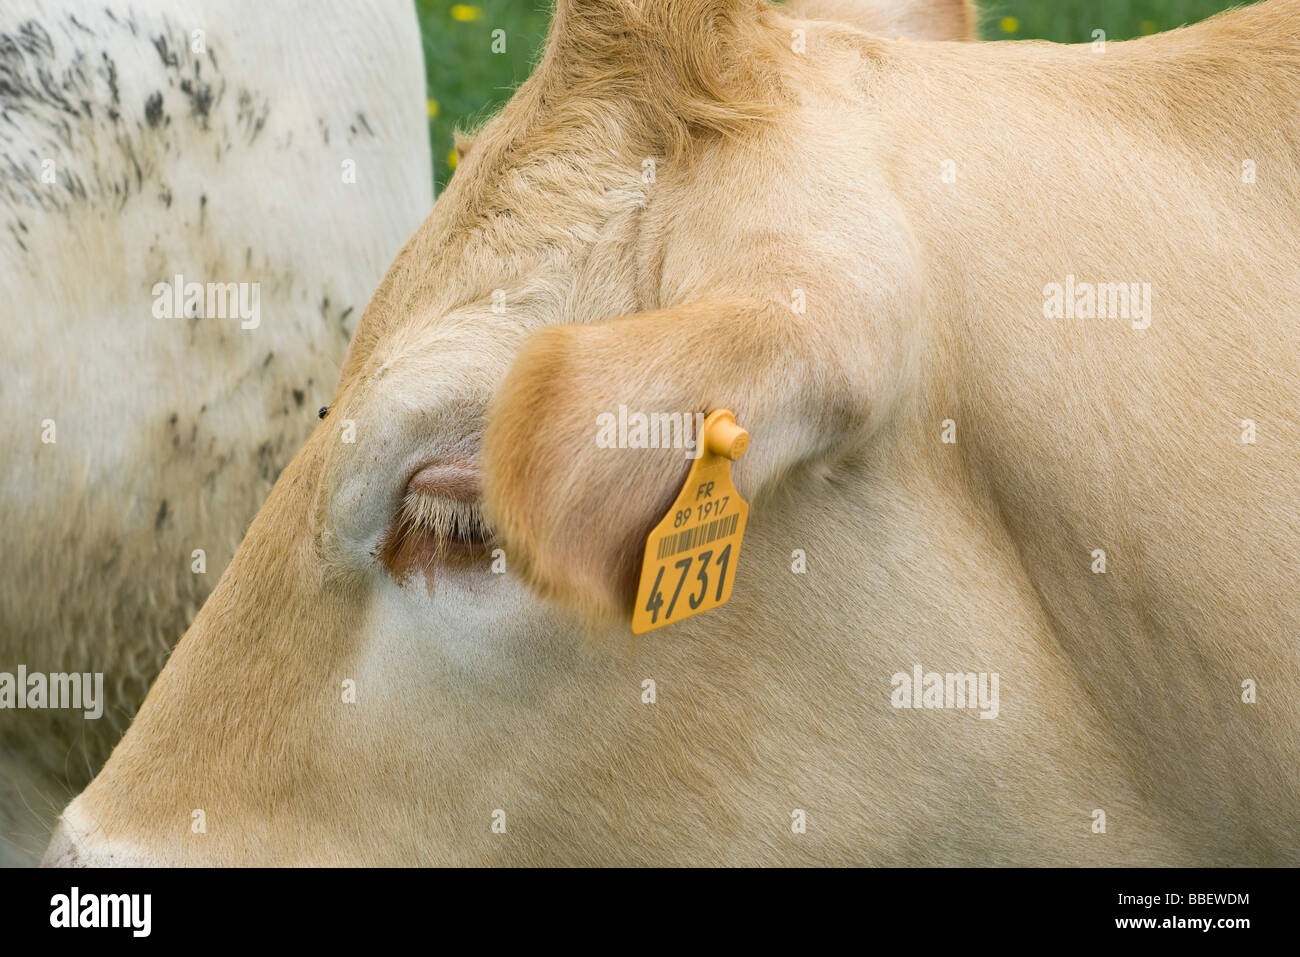 Cow with ear tag, extreme close-up Stock Photo